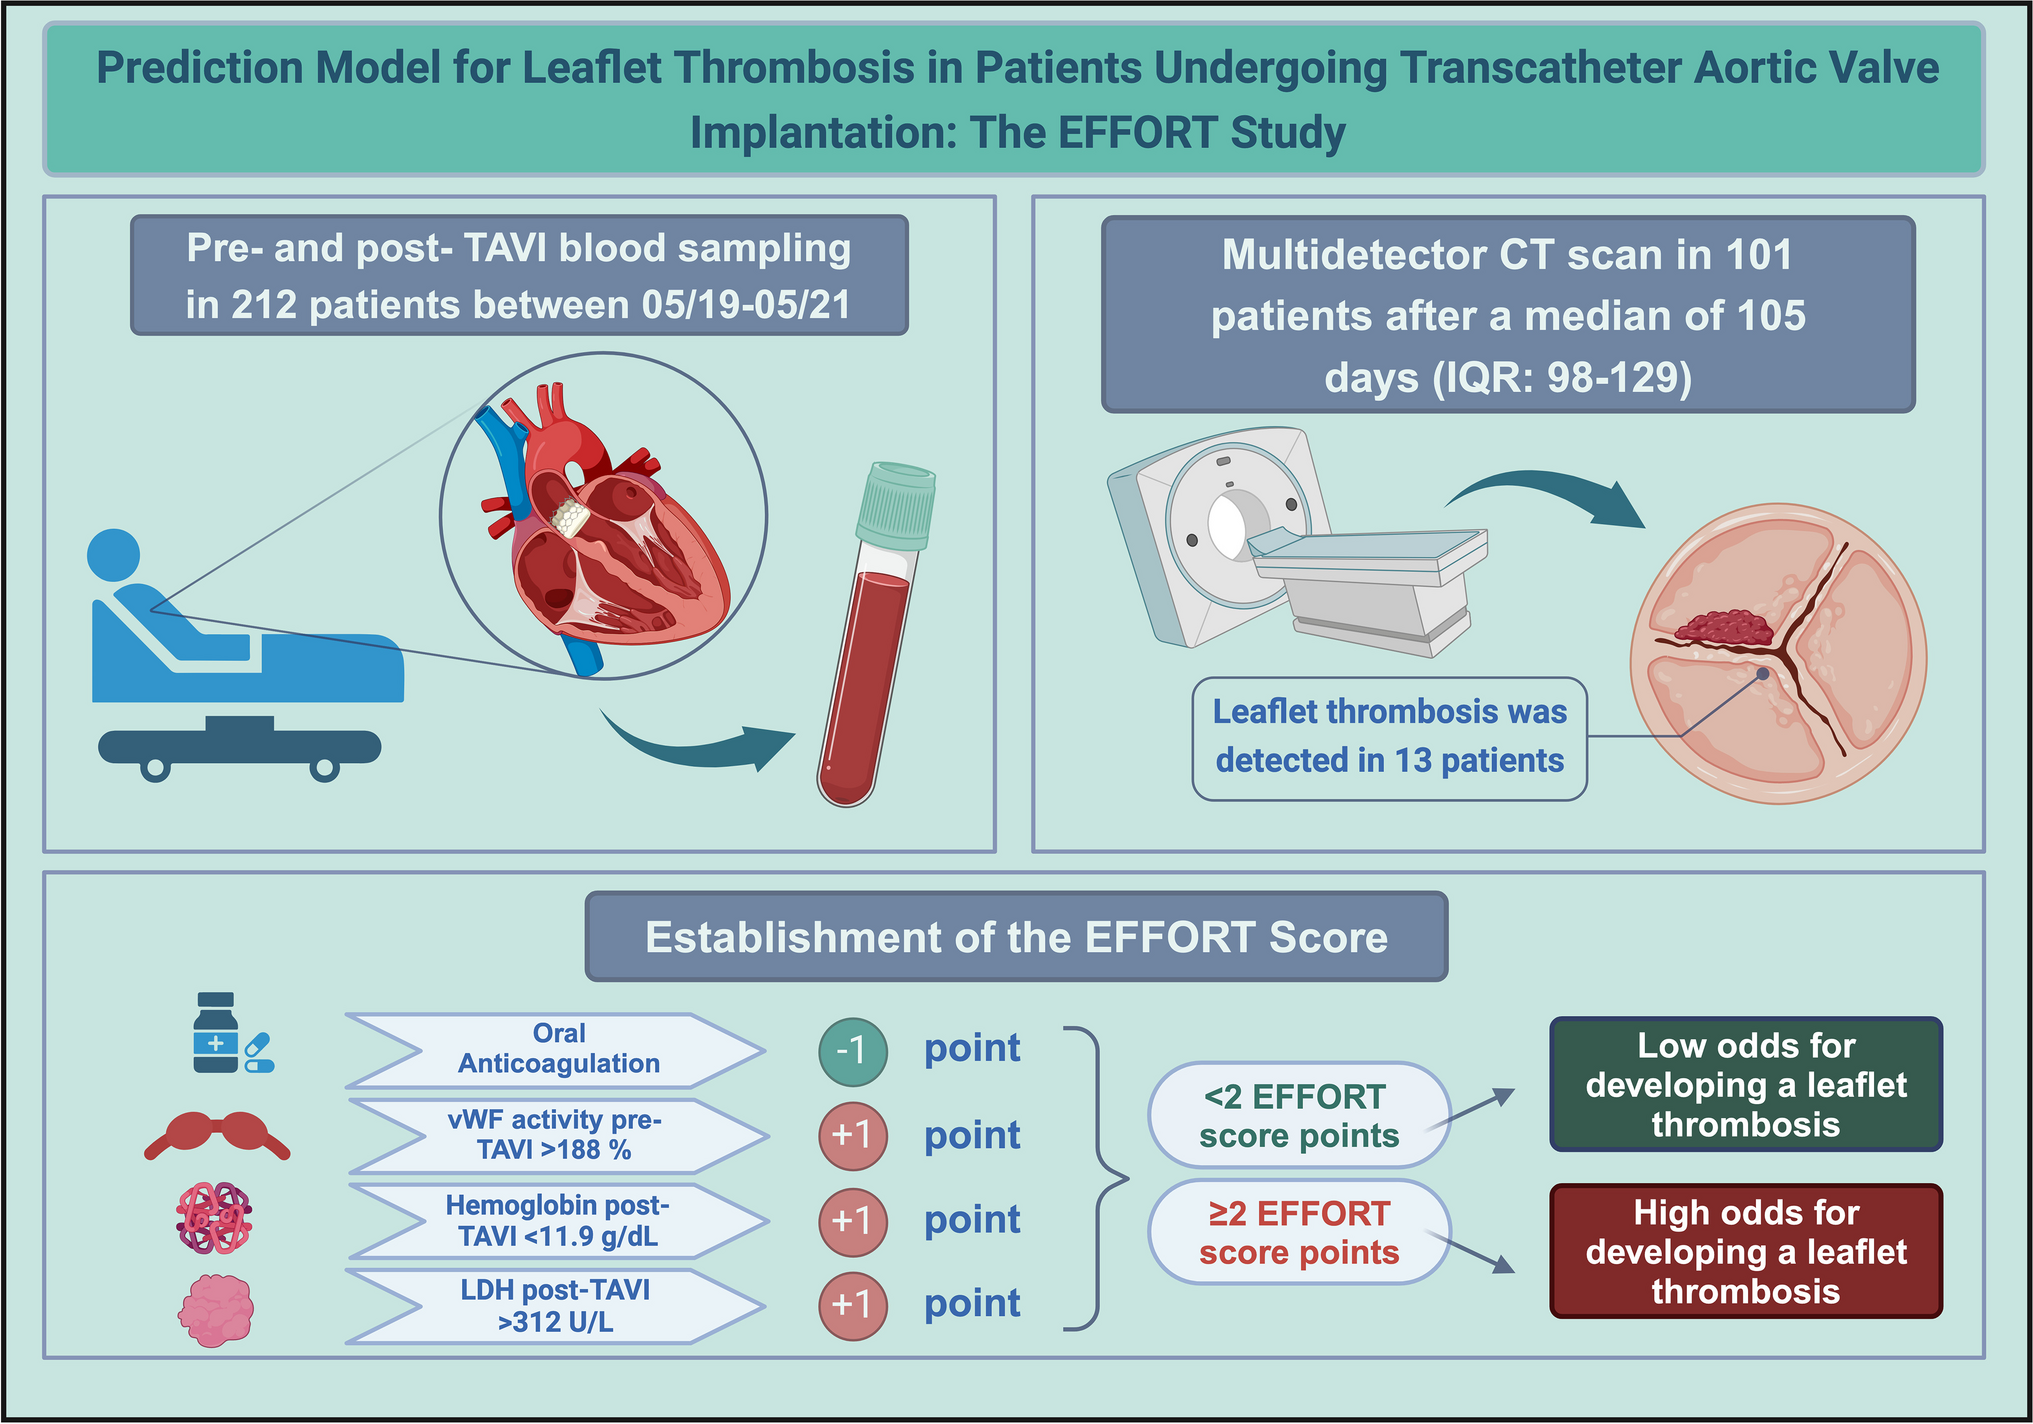 Prediction model for leaflet thrombosis in patients undergoing transcatheter aortic valve implantation: the EFFORT study